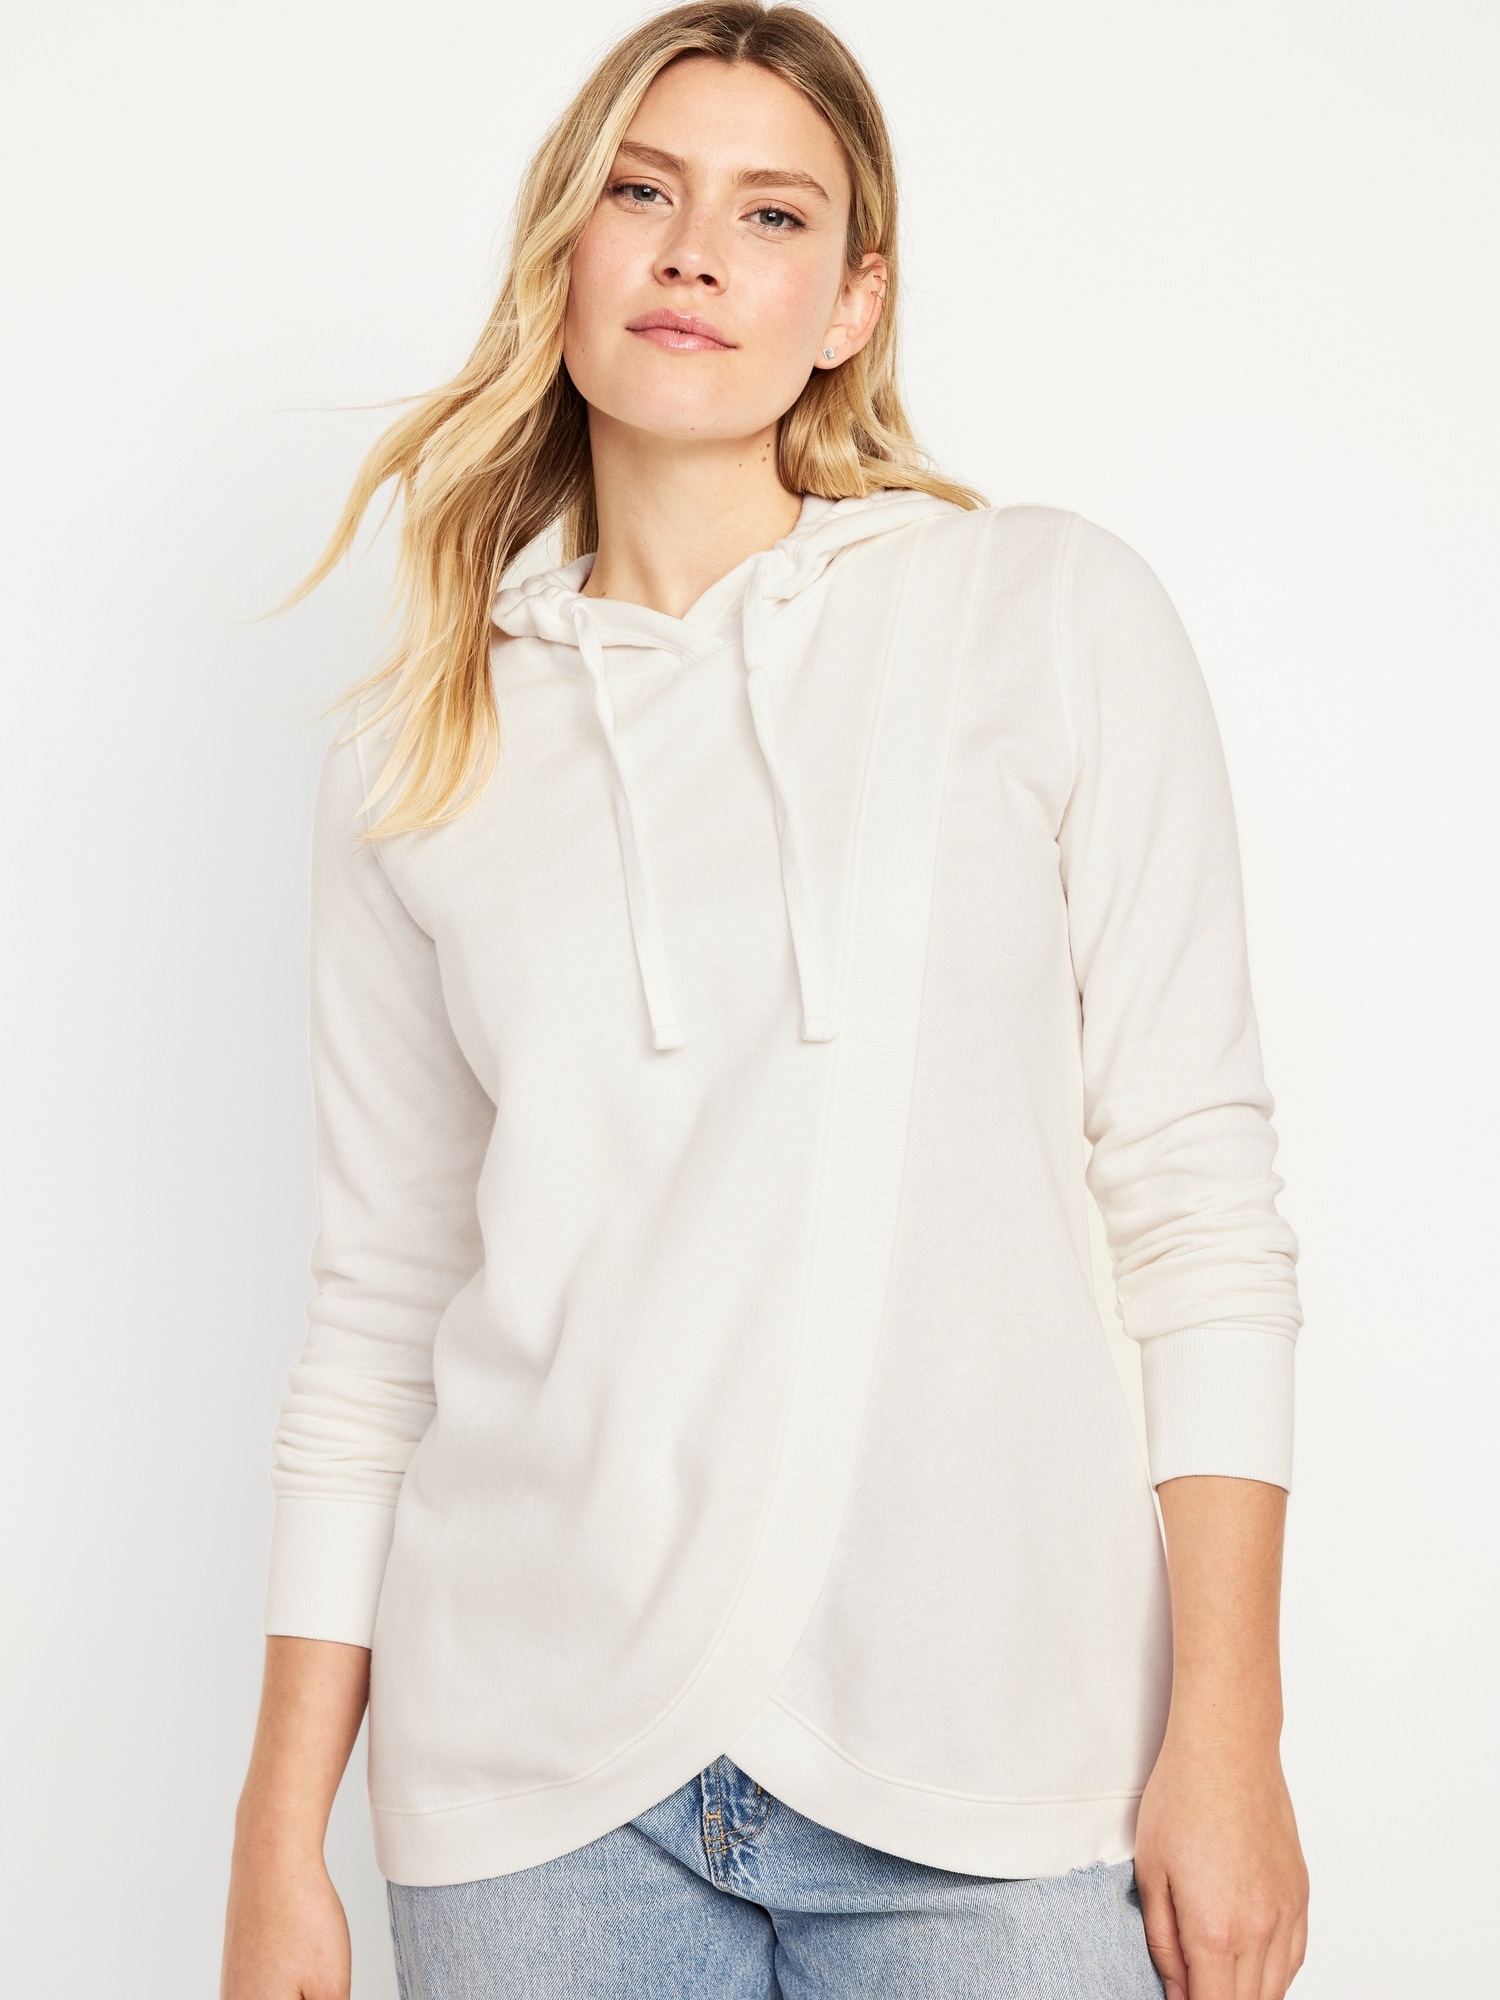 High-Neck with Buttons Nursing Pullover - Thyme Maternity